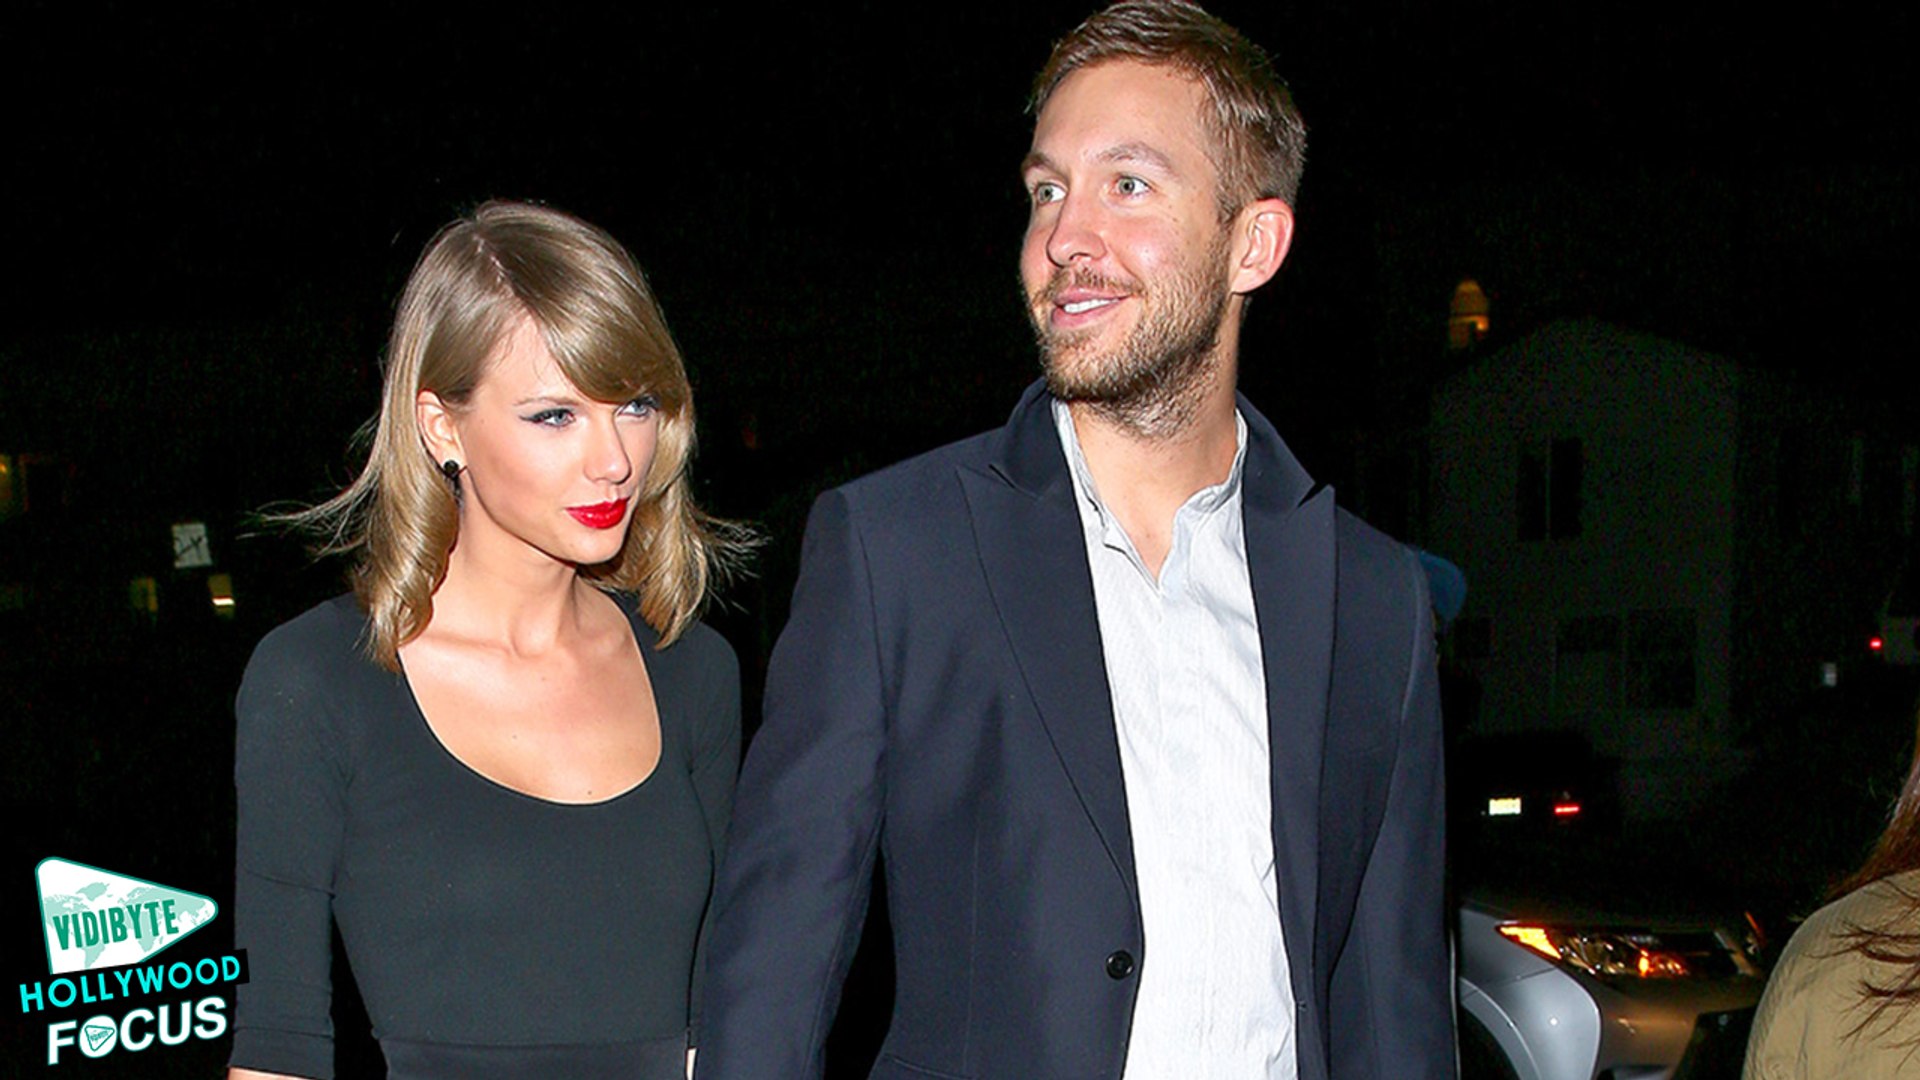 Taylor Swift and Calvin Harris Collaborating on New Music